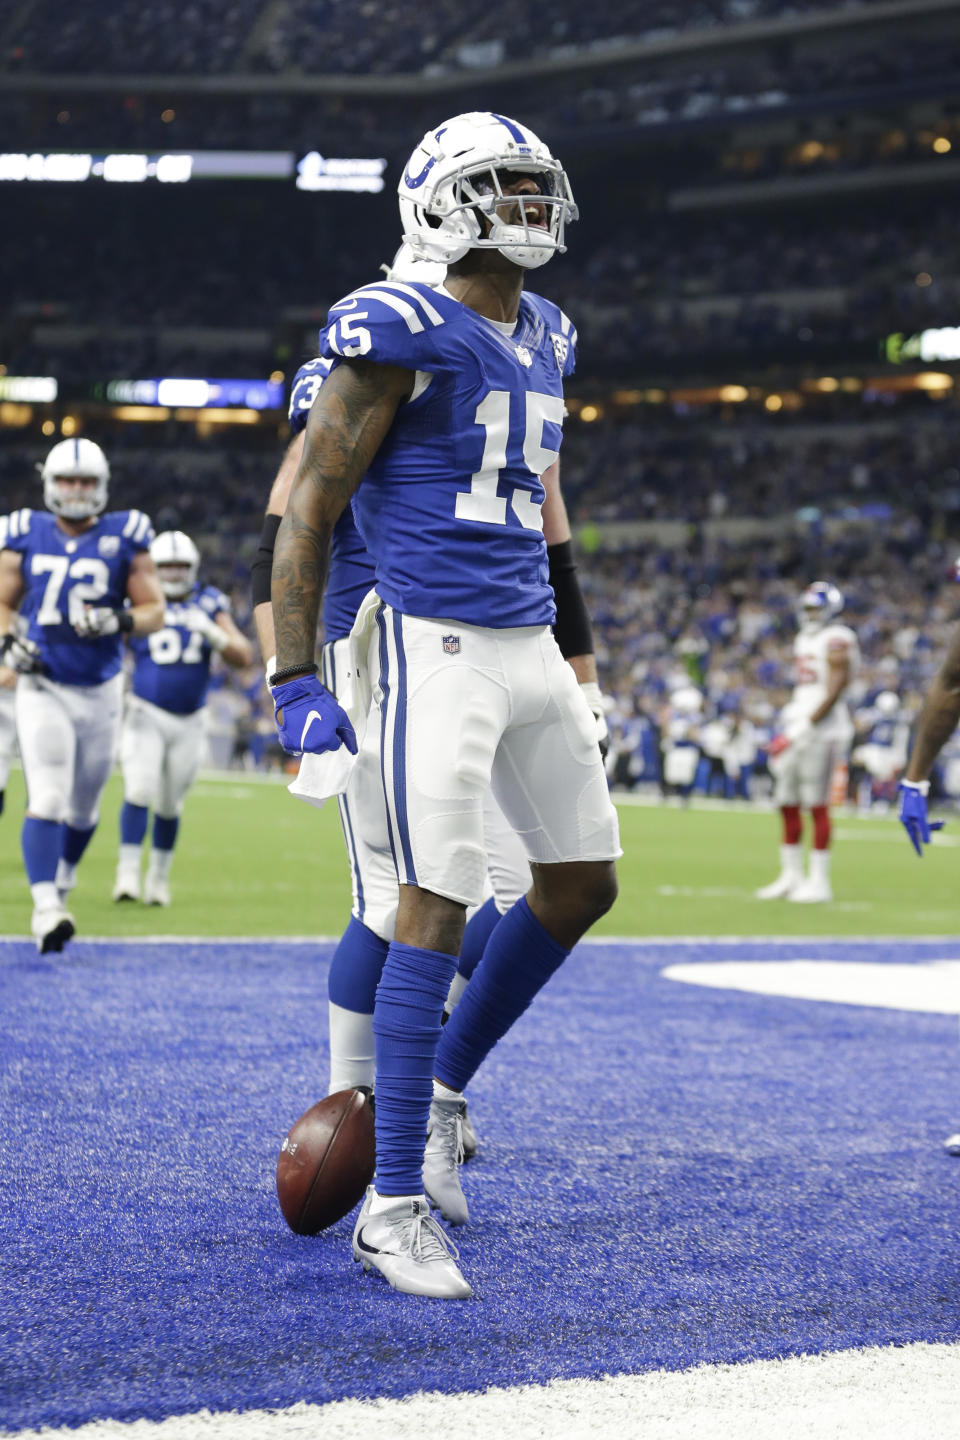 Indianapolis Colts wide receiver Dontrelle Inman (15) celebrates a touchdown against the New York Giants during the second half of an NFL football game in Indianapolis, Sunday, Dec. 23, 2018. (AP Photo/AJ Mast)